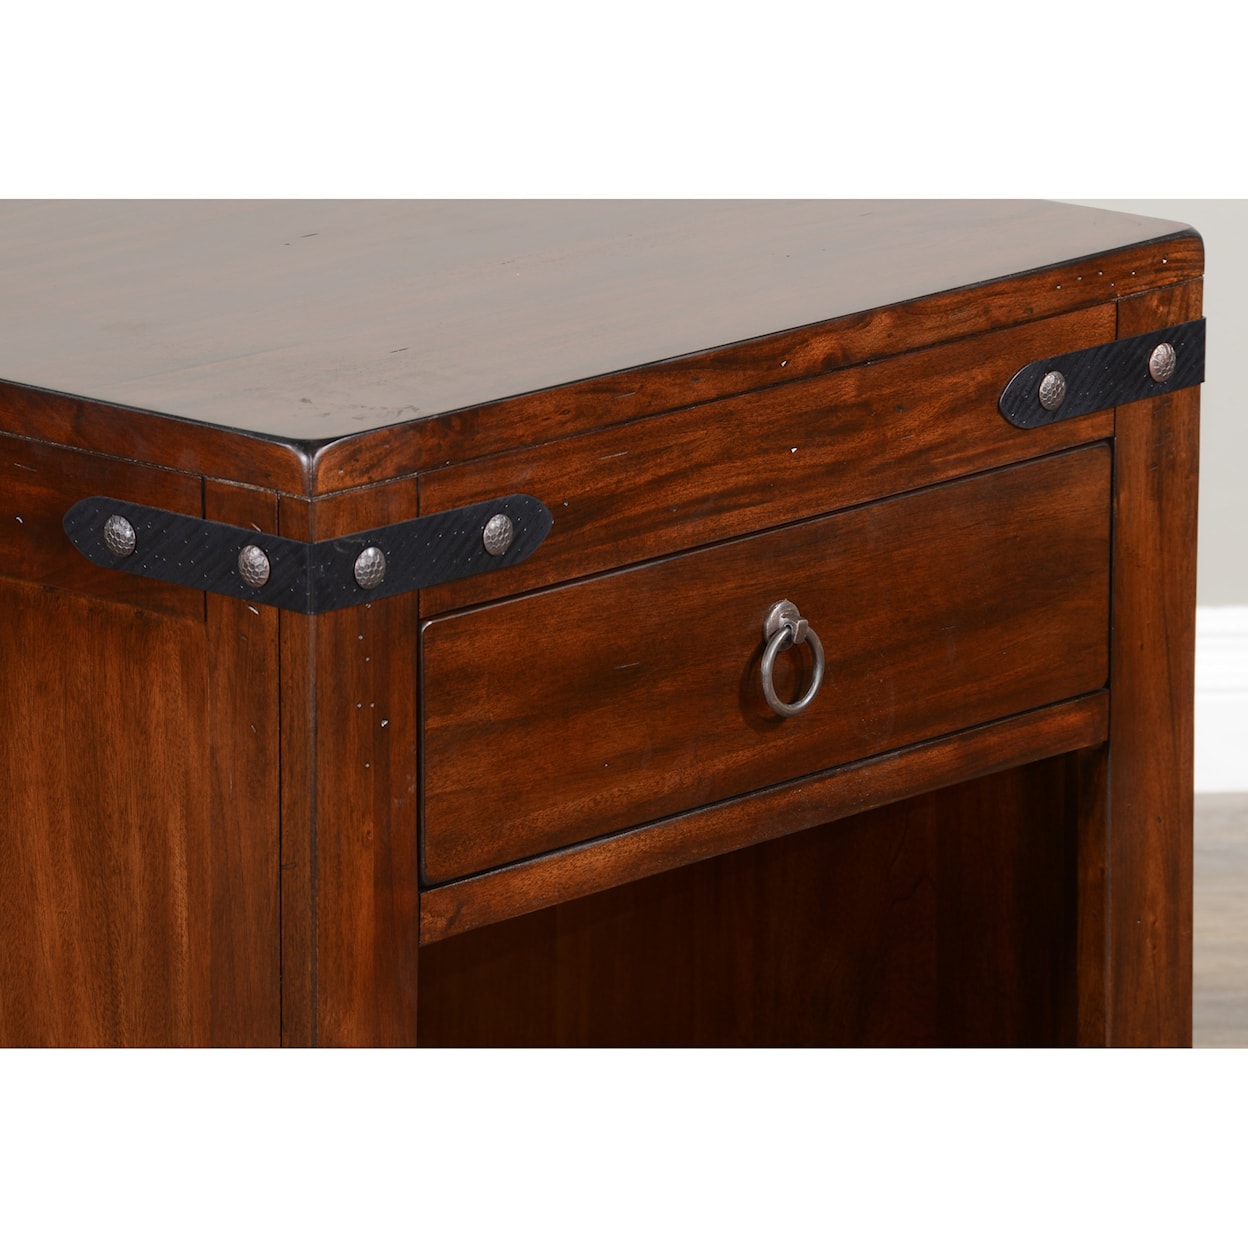 Sunny Designs 12136 End Table